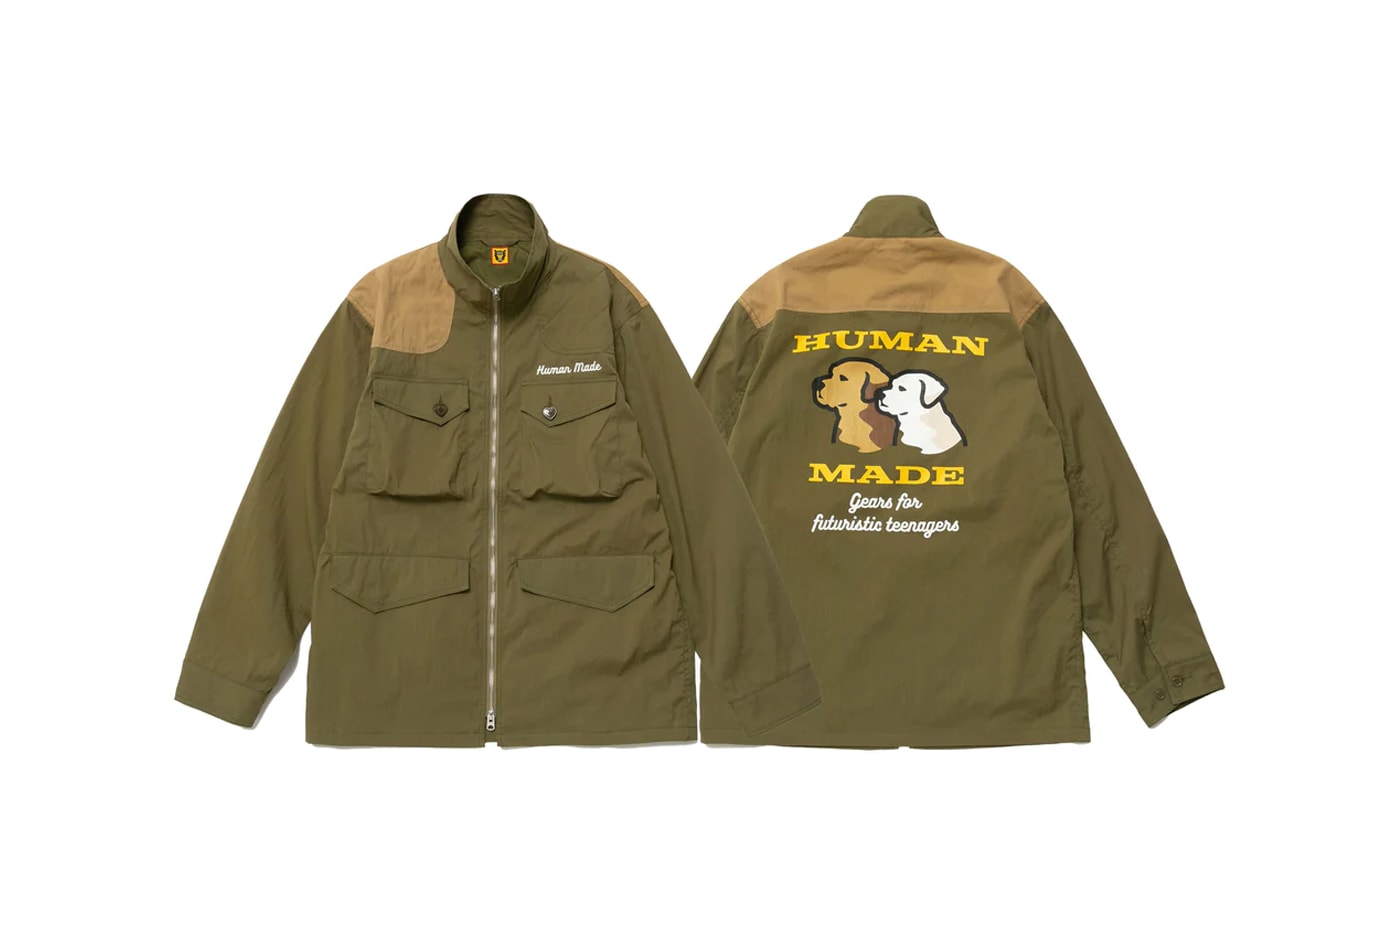 Human Made hunting collection march 4 jacket vest pullover sweater vintage bags duck deer retriever release info date price